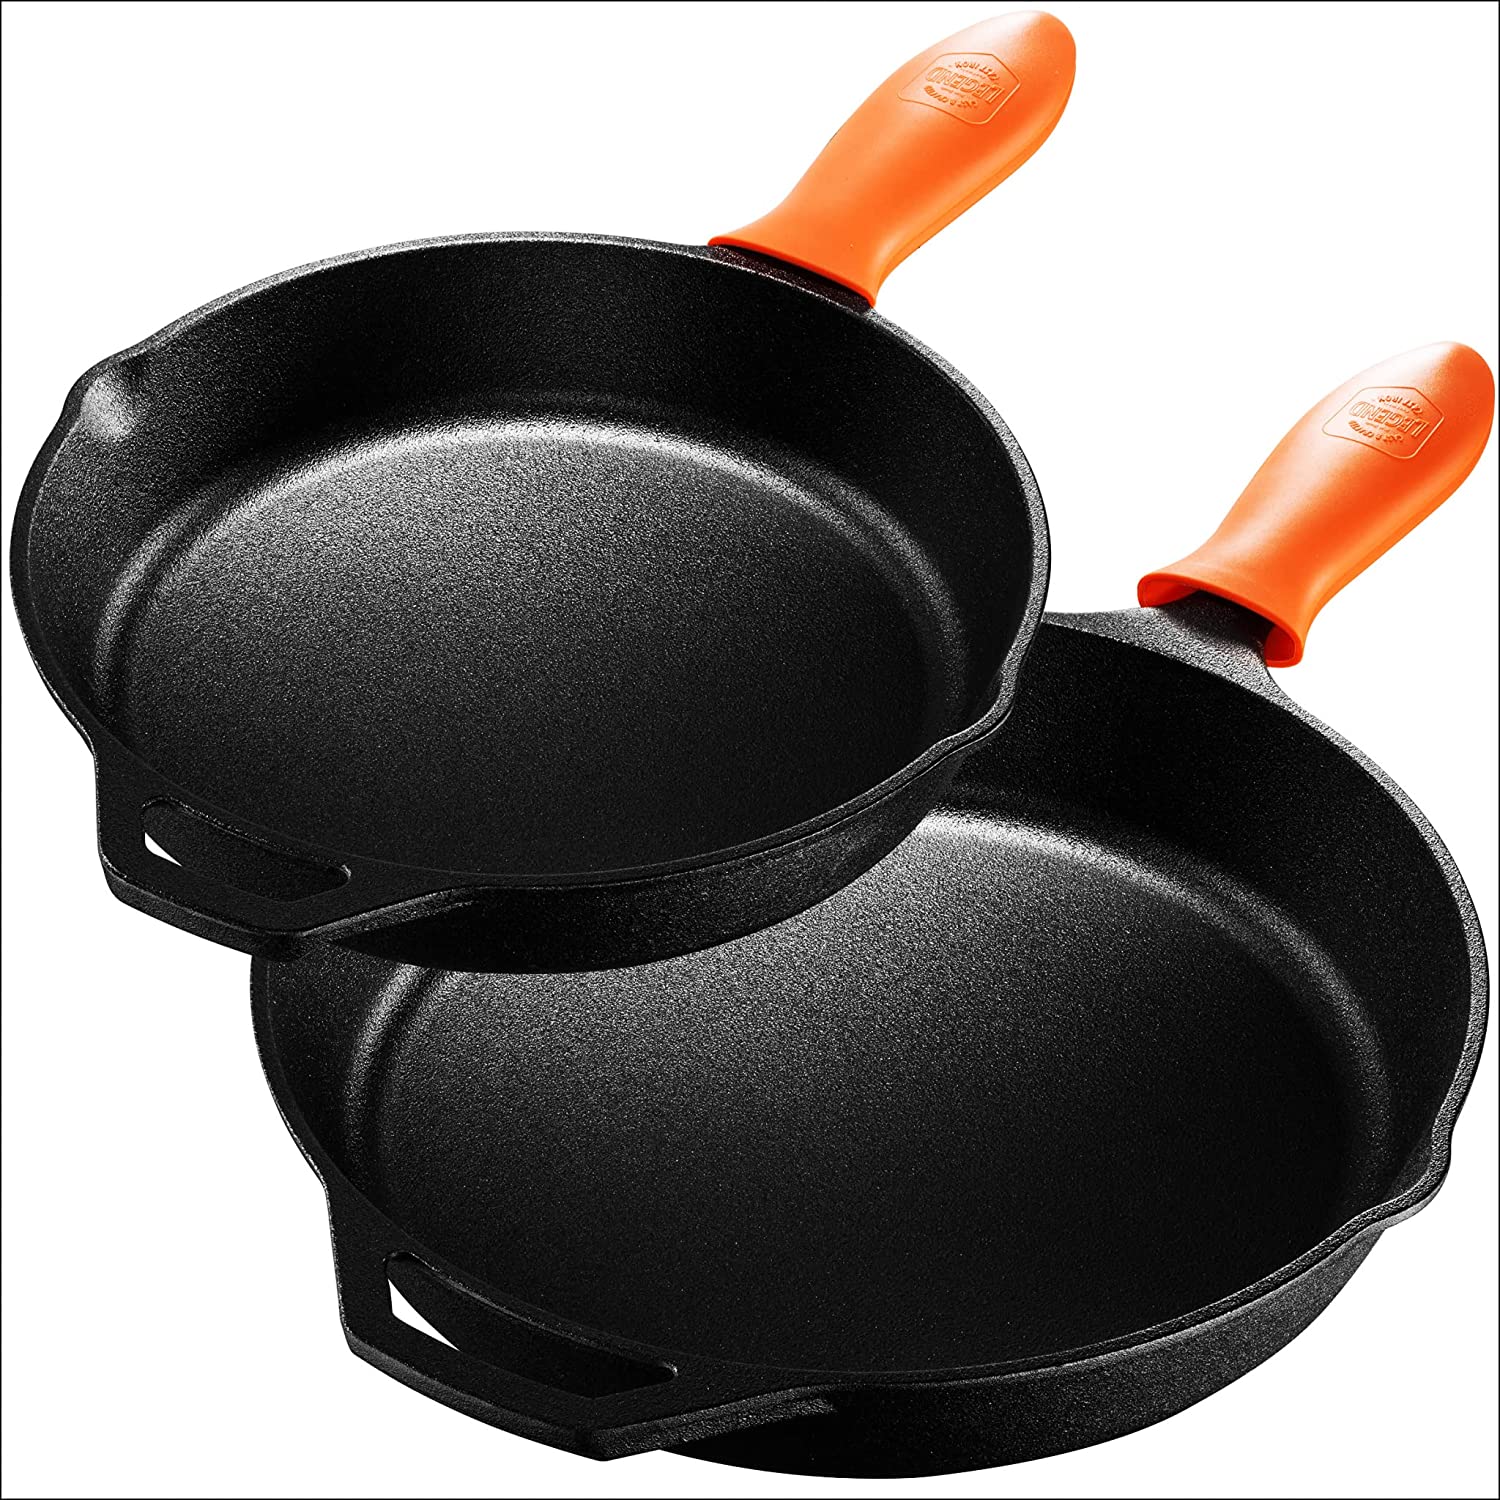 Legend Cast Iron Griddle for Gas Stovetop